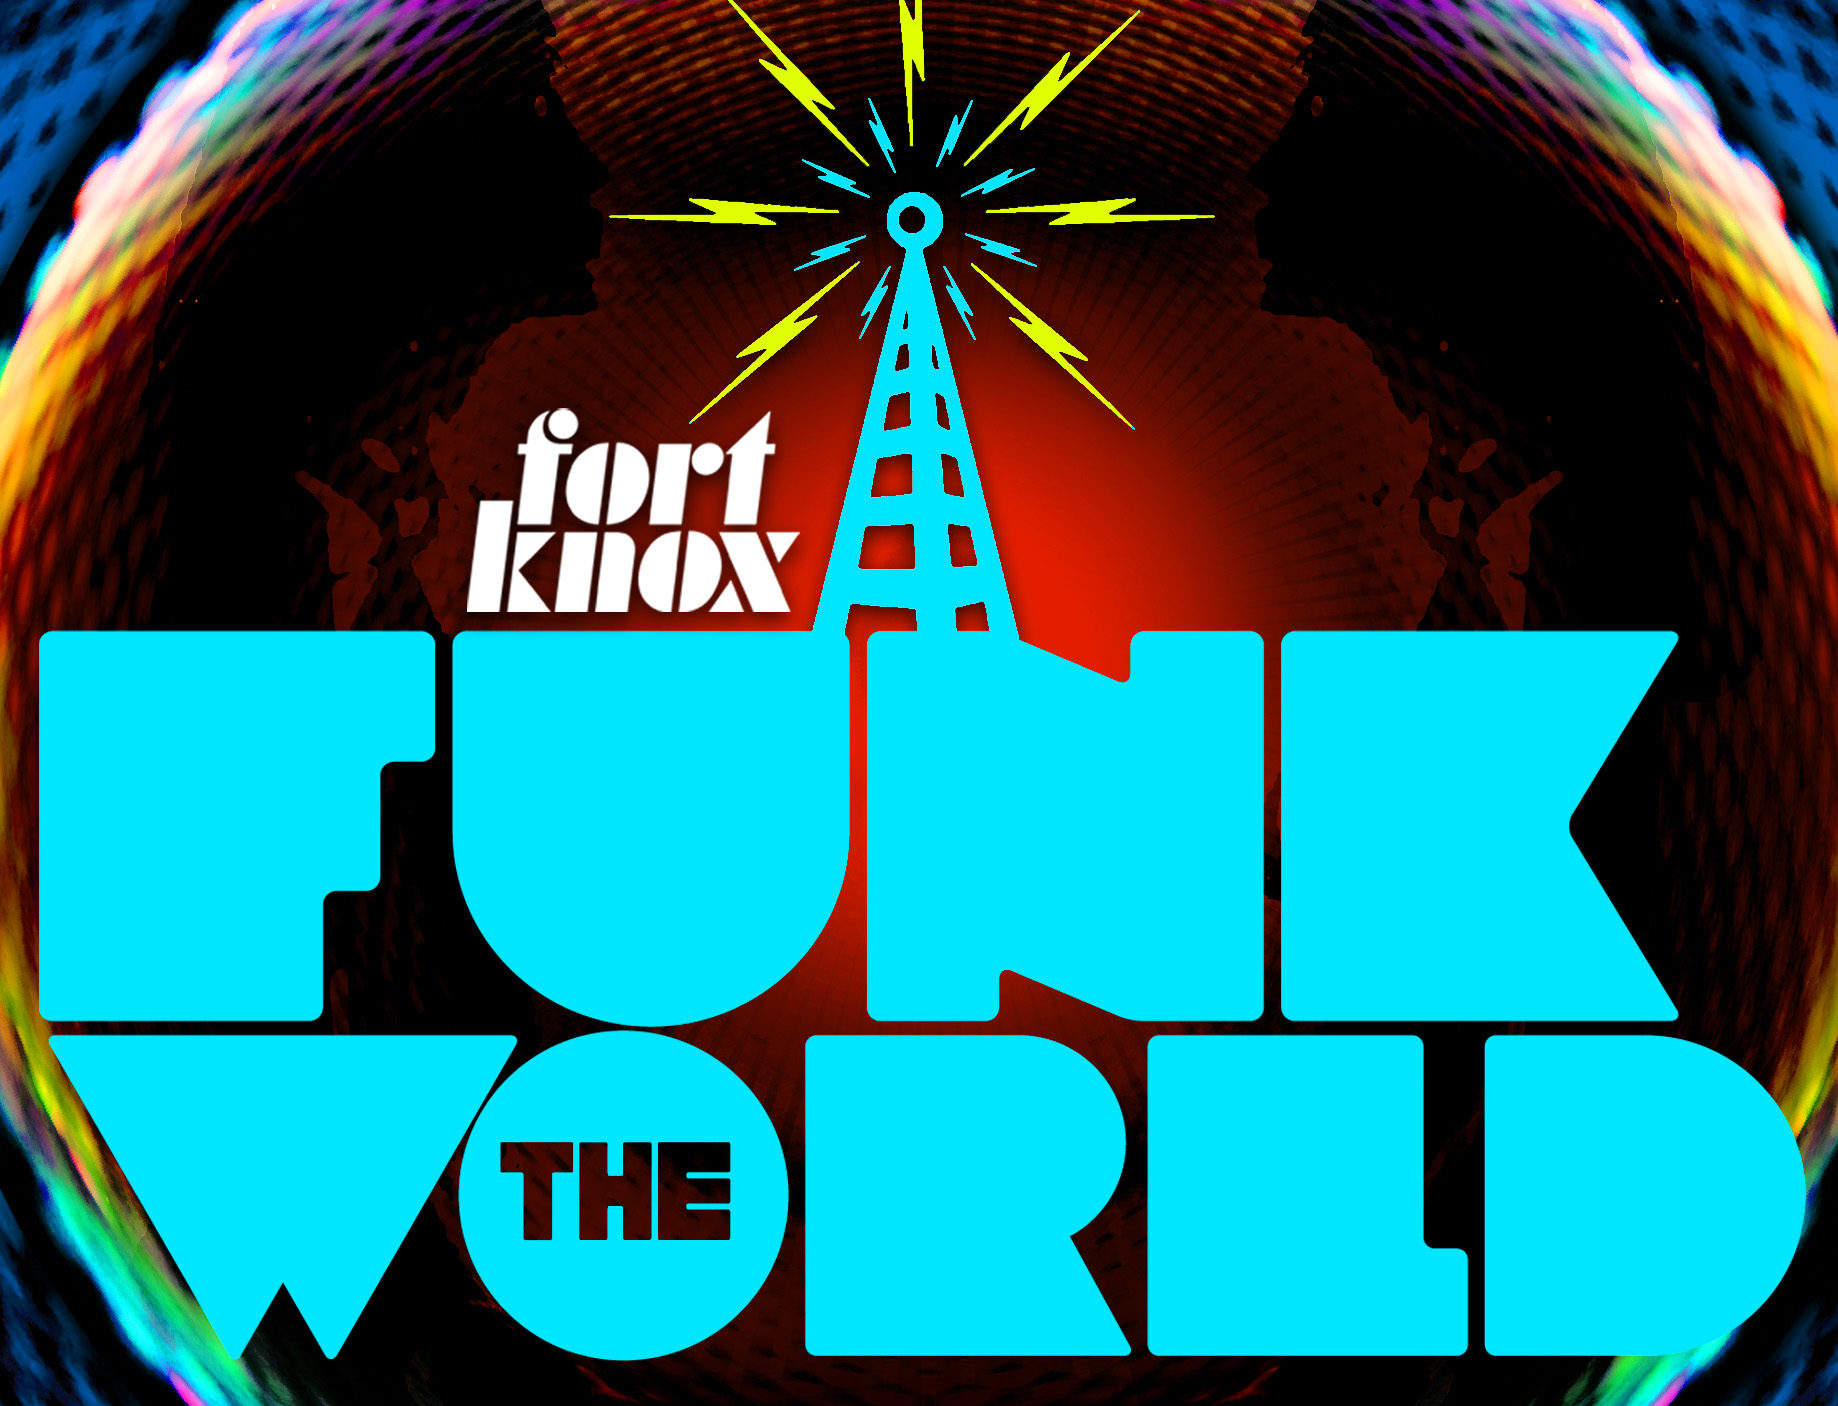 fort knox 5 funk the world 42 mix